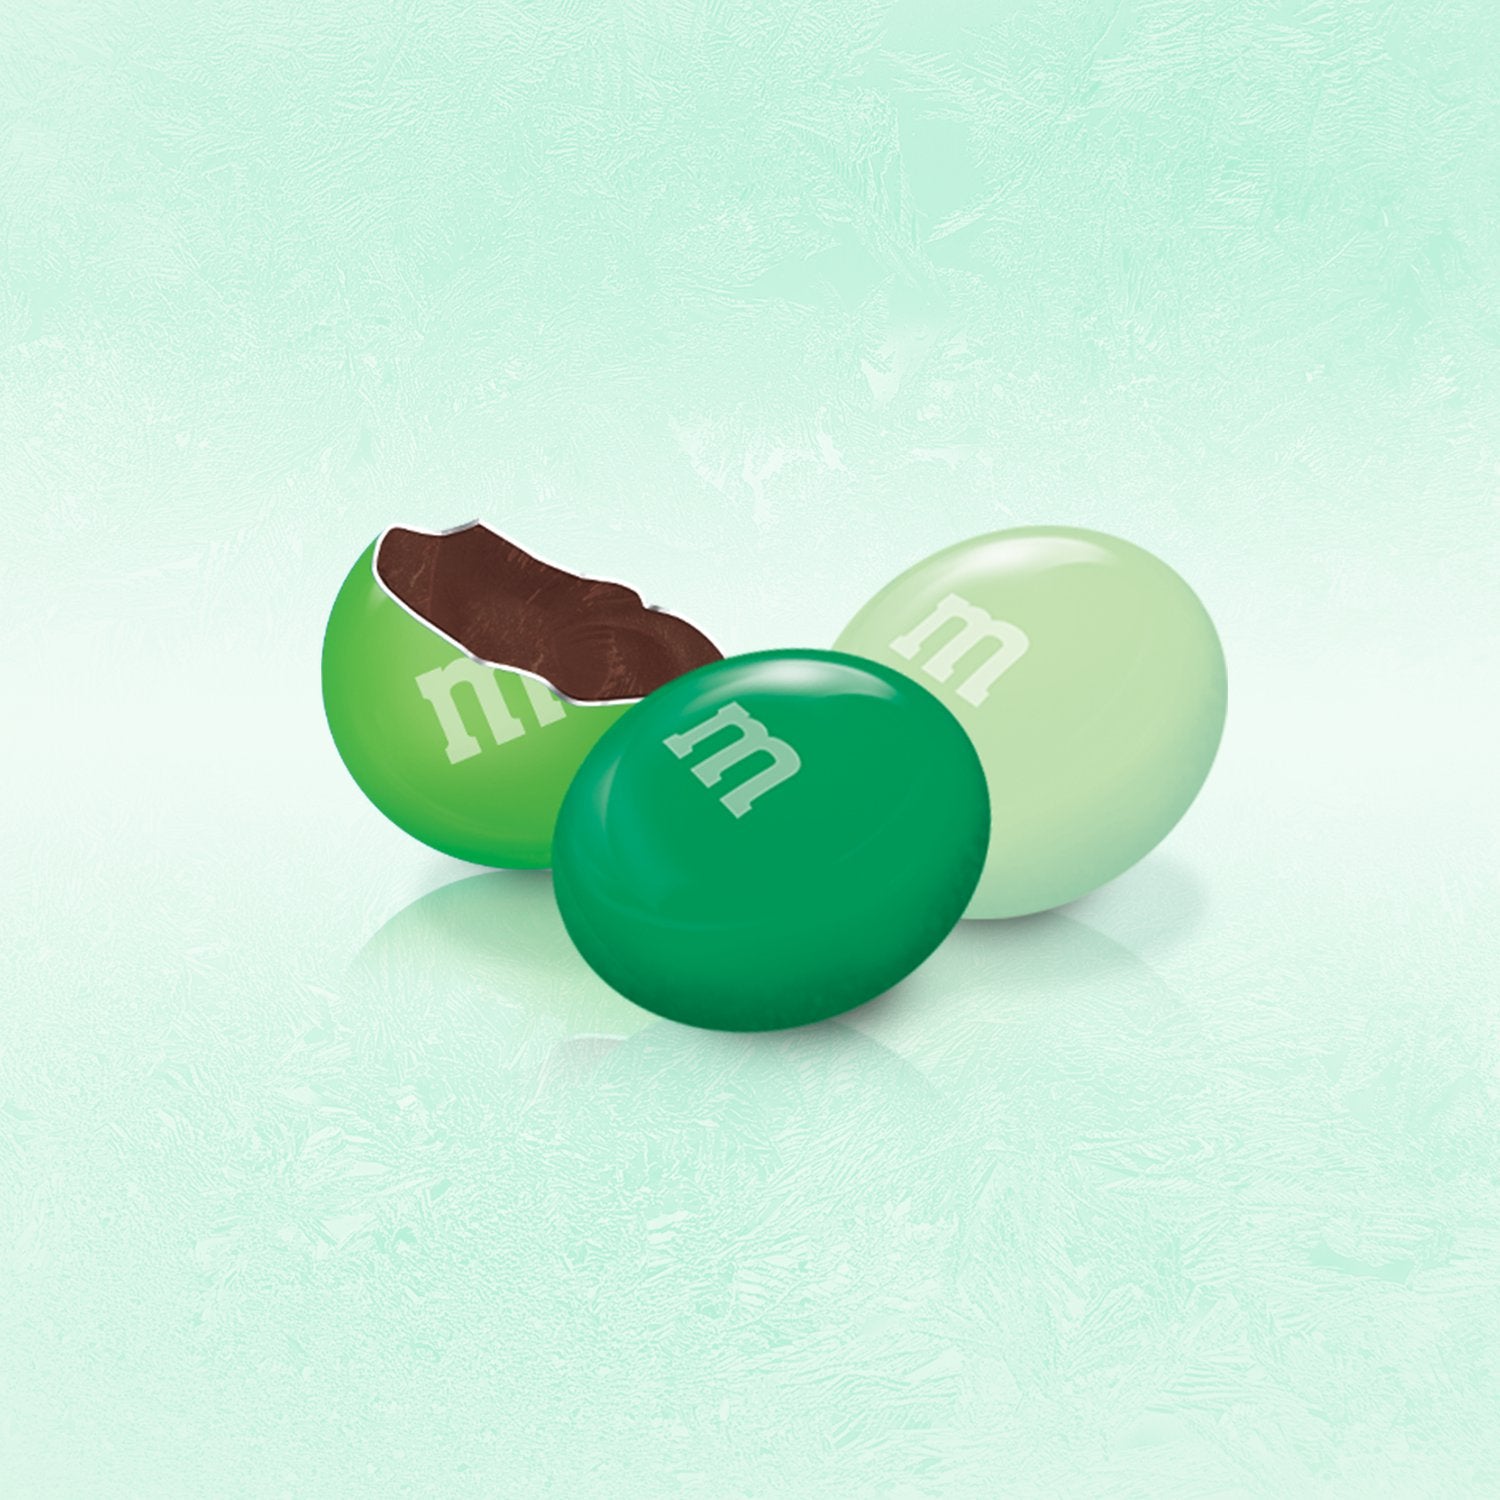 Save on M&M's Holiday Mint Chocolate Candies Order Online Delivery